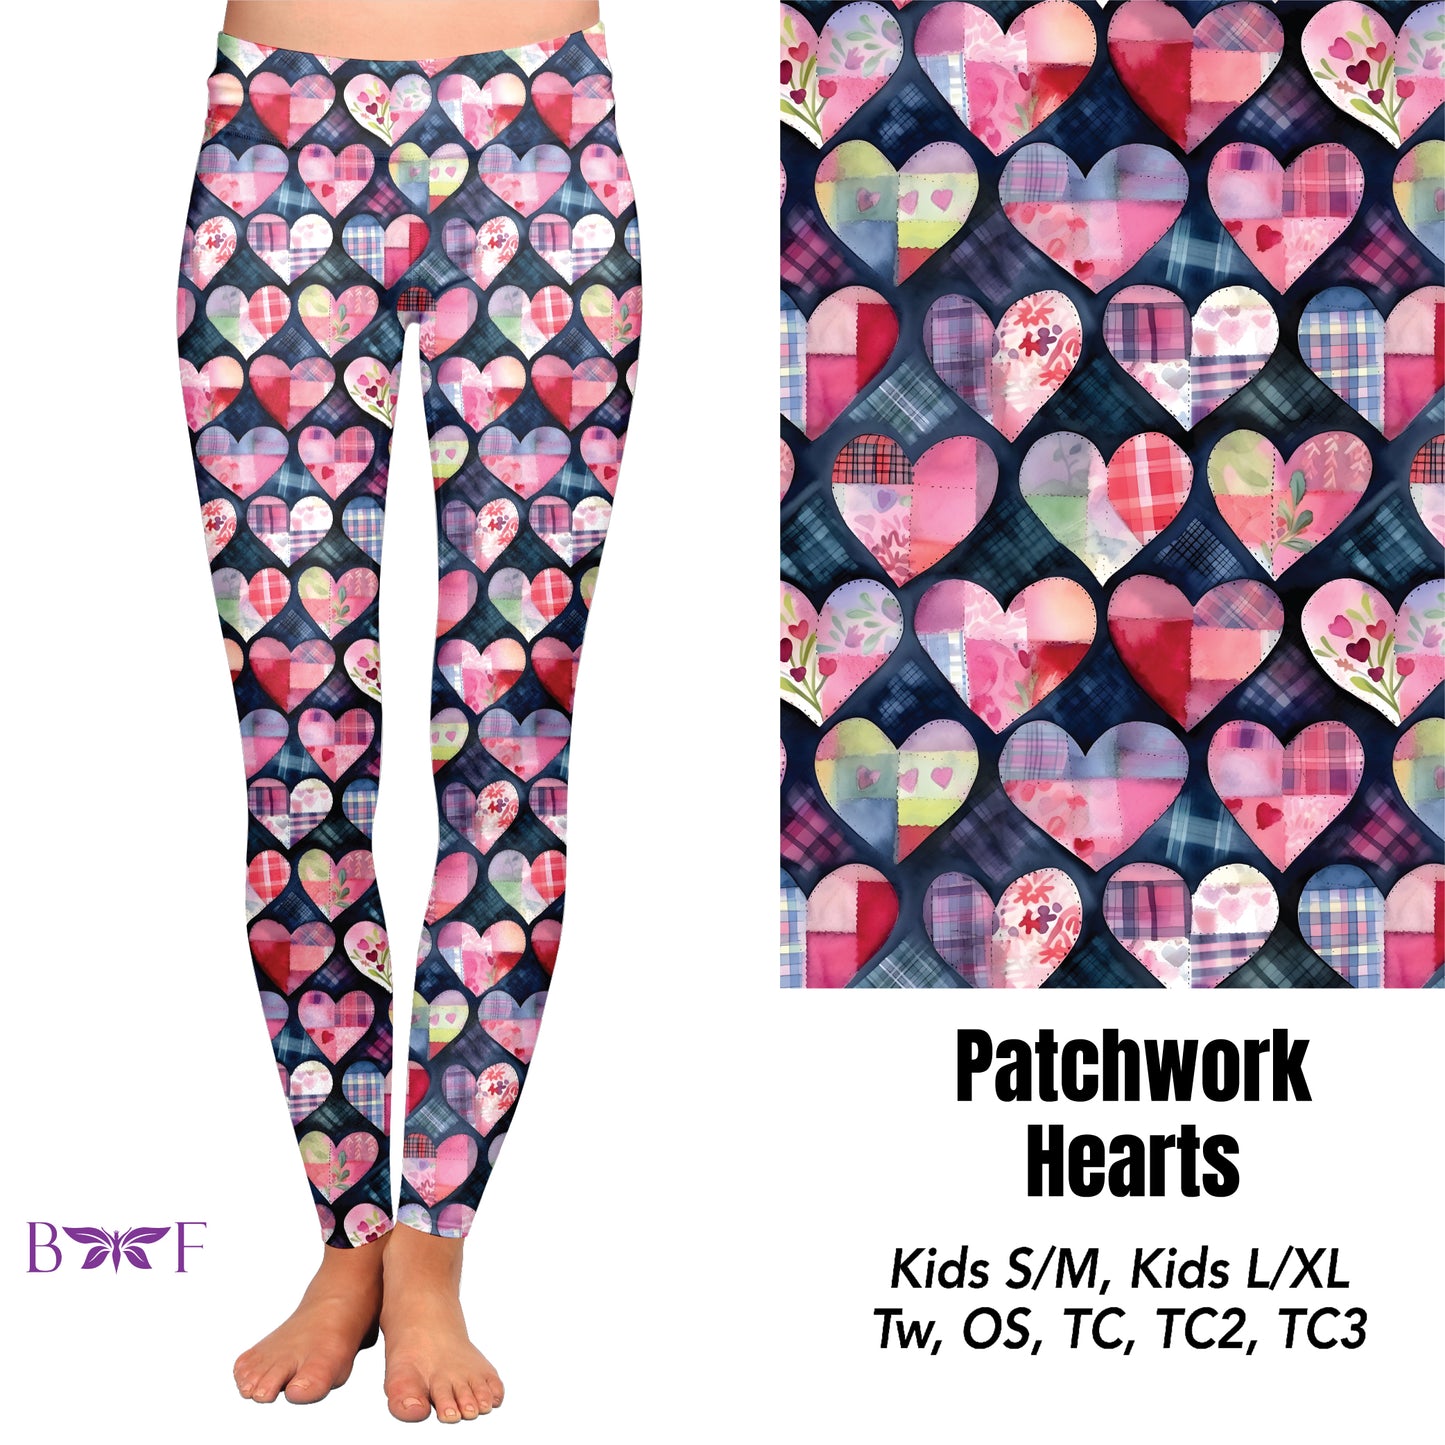 Patchwork hearts leggings and capris with pockets